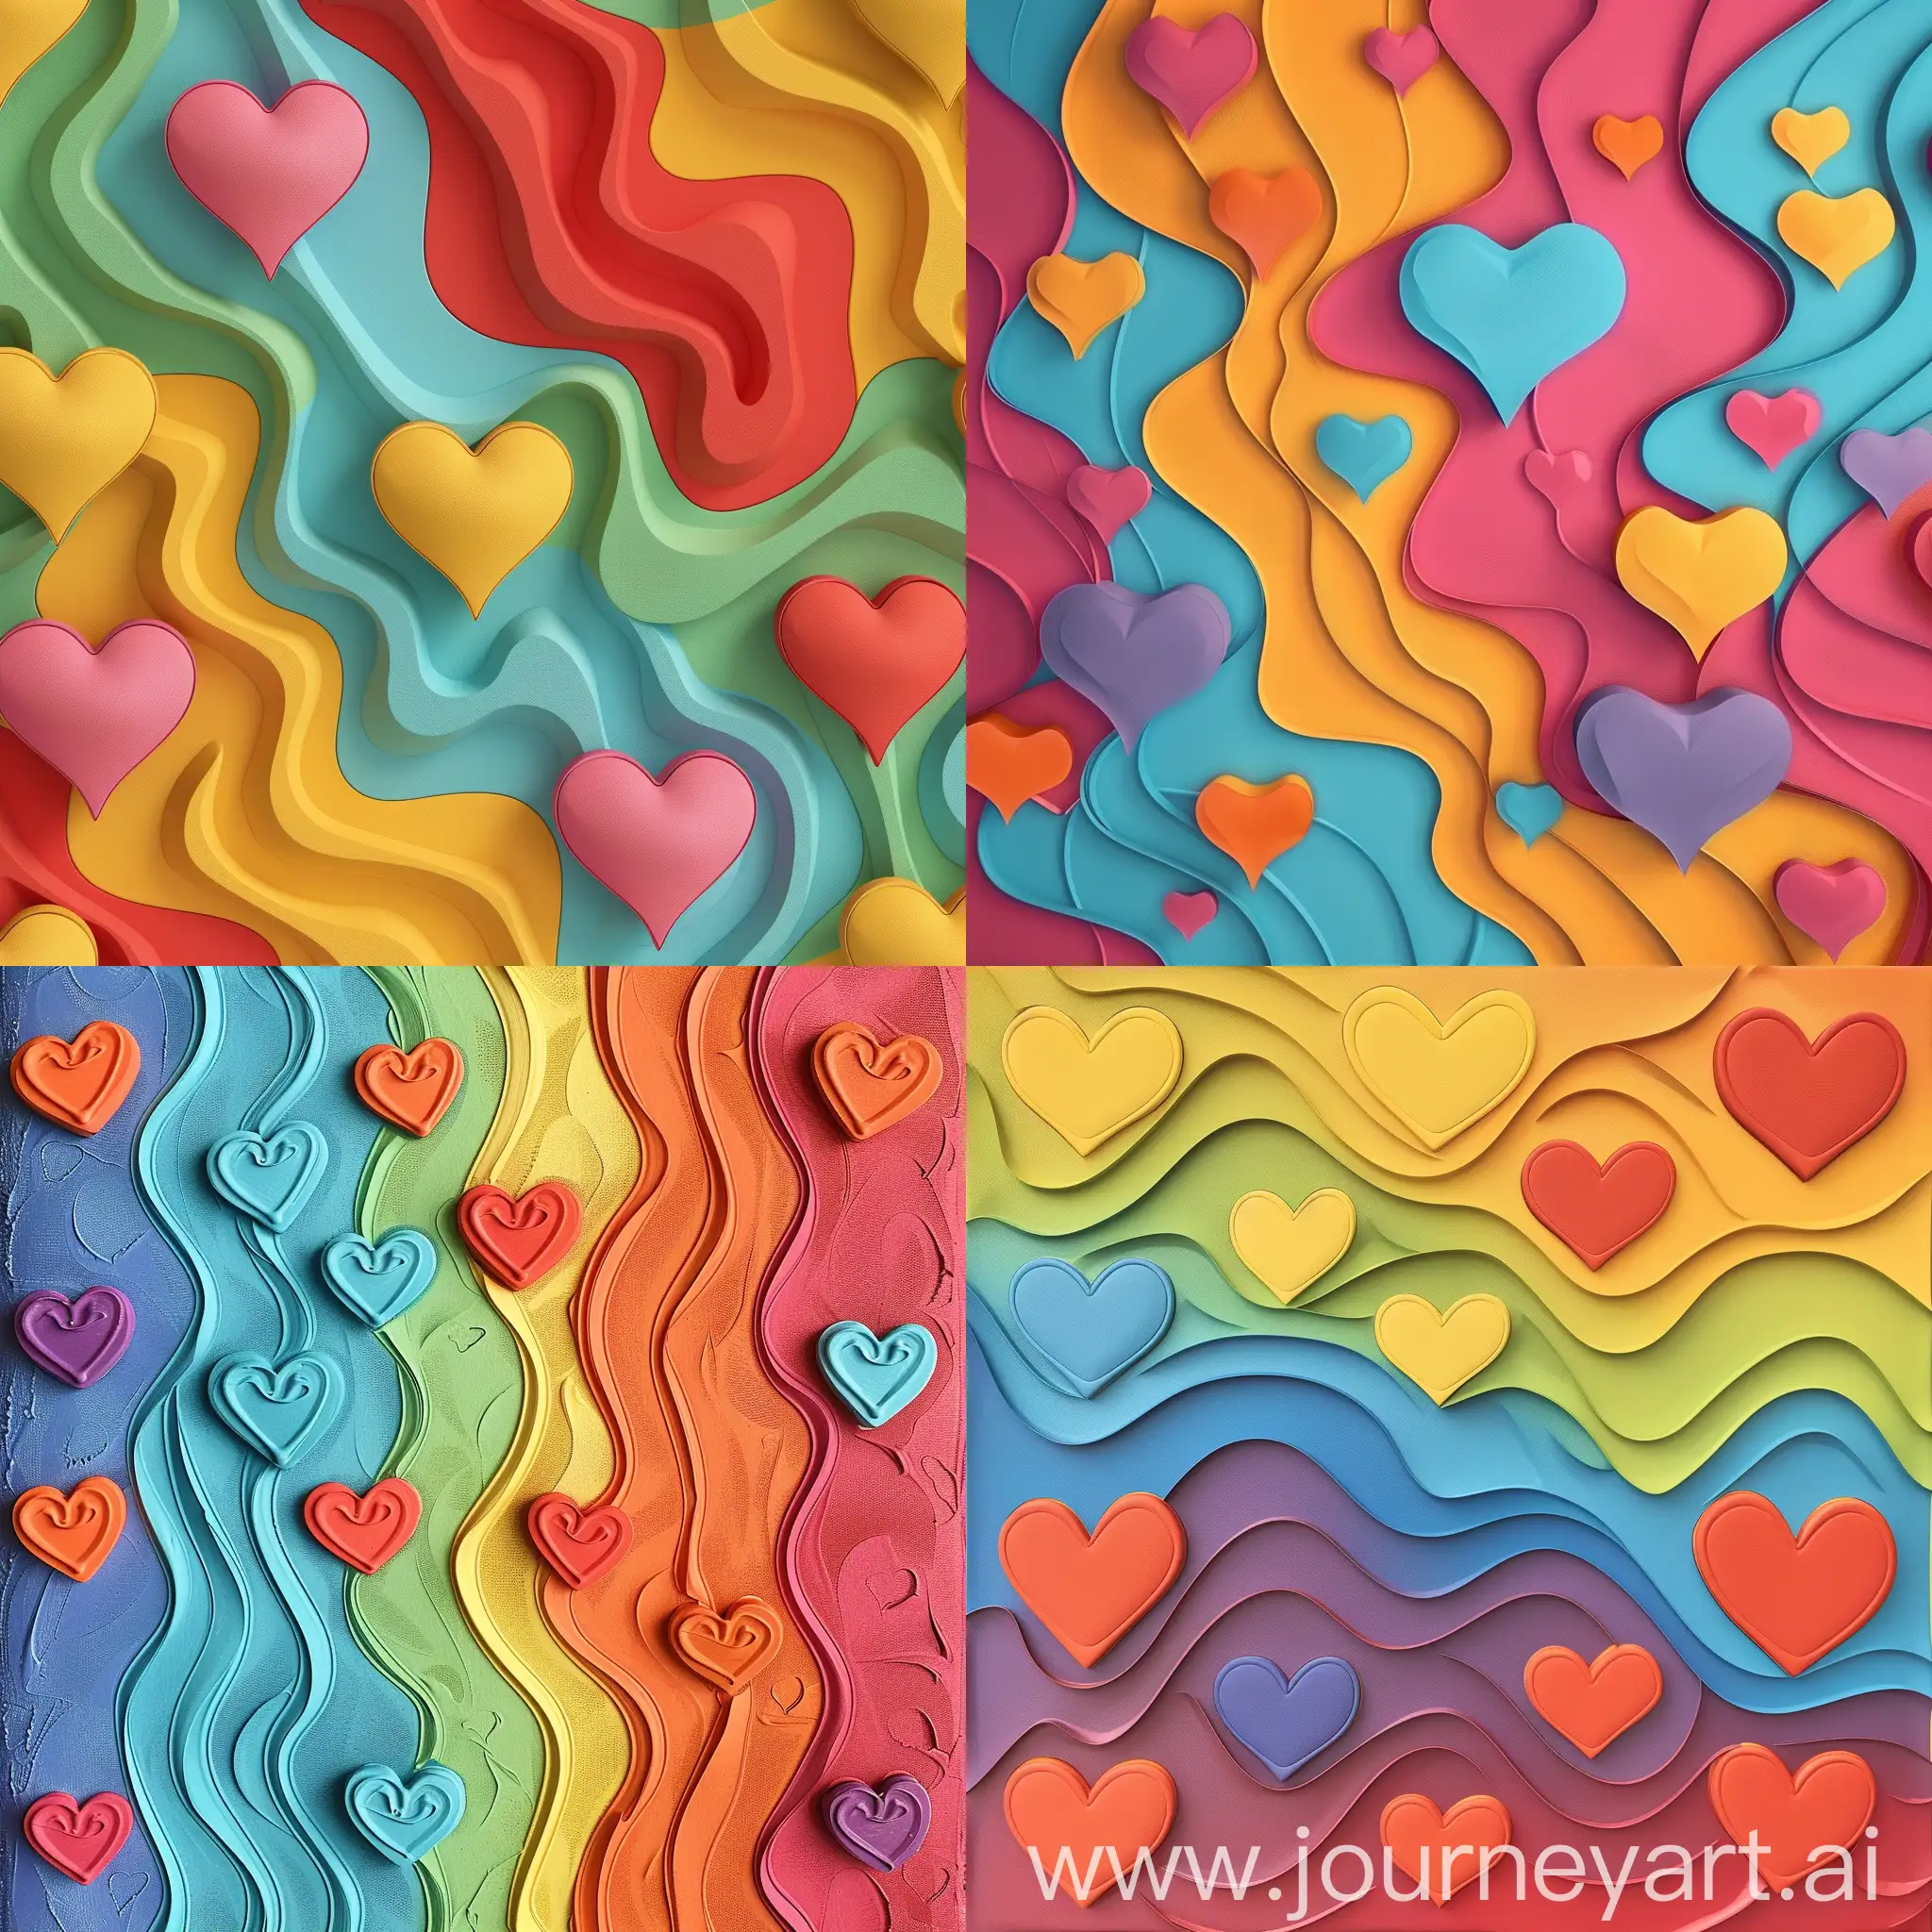 Colorful-Heart-Wavy-Texture-Pattern-for-Valentines-Day